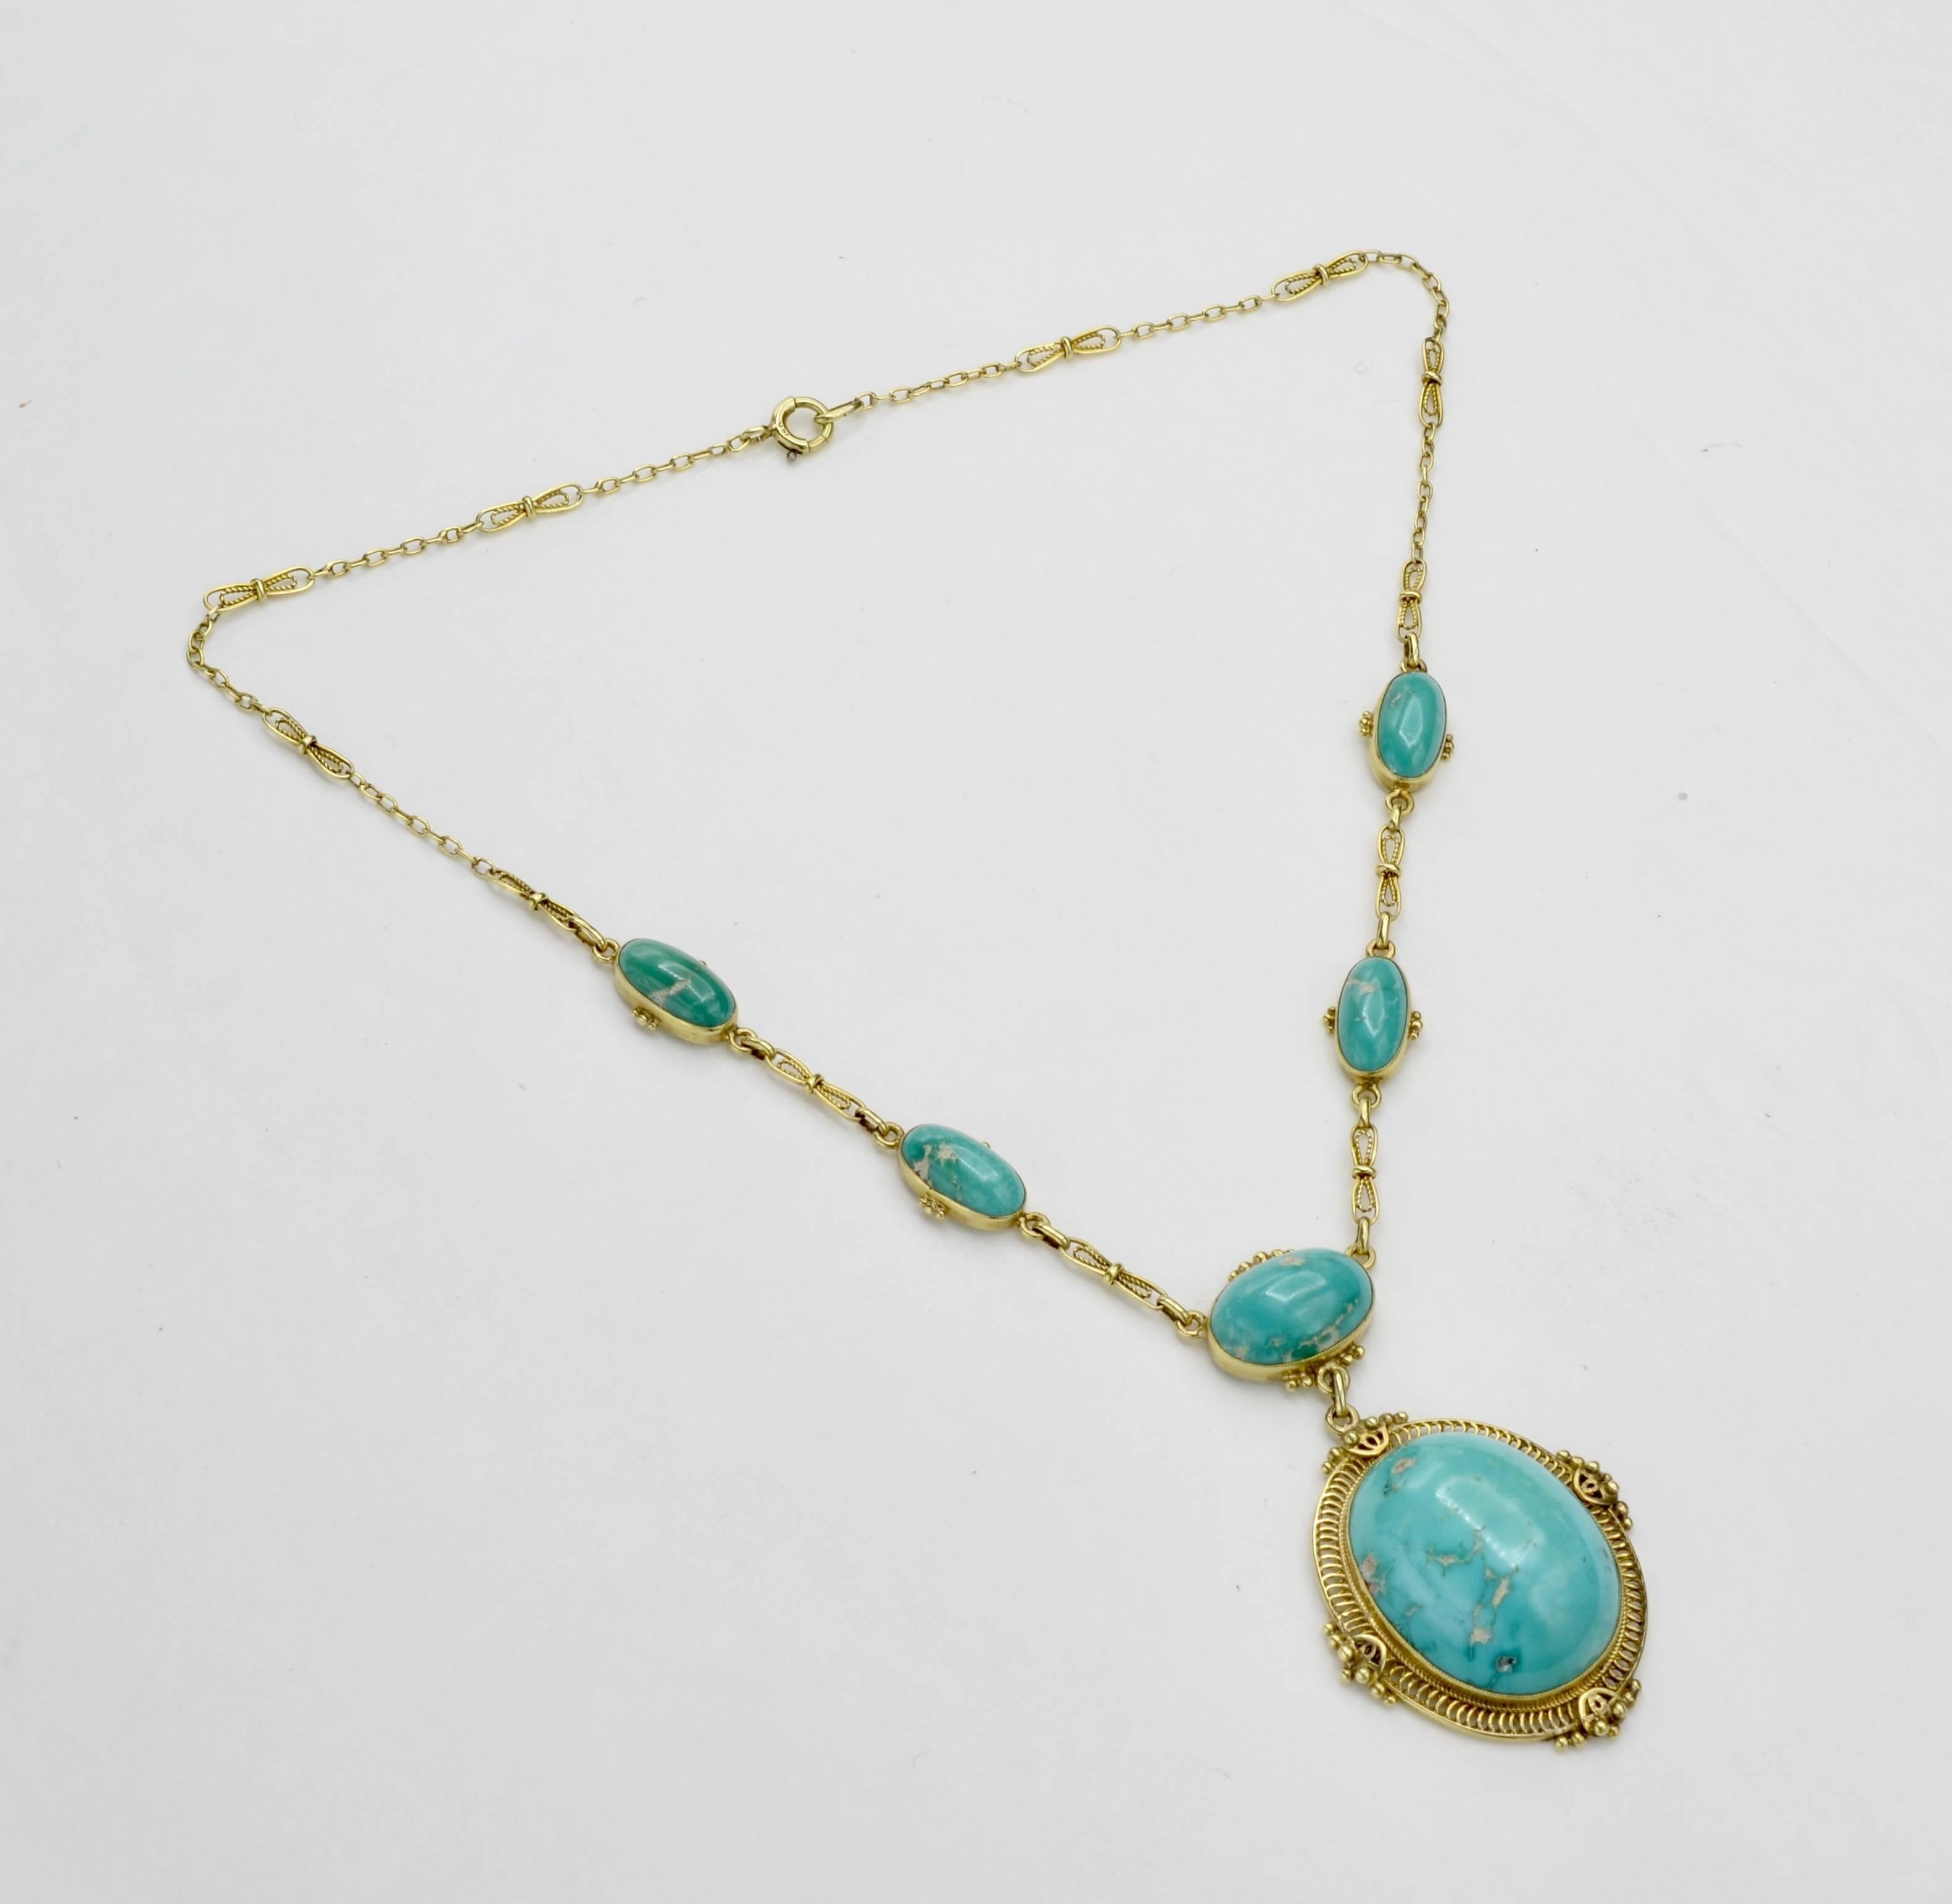 This stunning necklace has beautifully matched turquoise in the warmest shade or green/blue. The gold chain has an open lace design that beautifully frames the pendants and center turquoise drop for a dramatic but delicate effect. This necklace